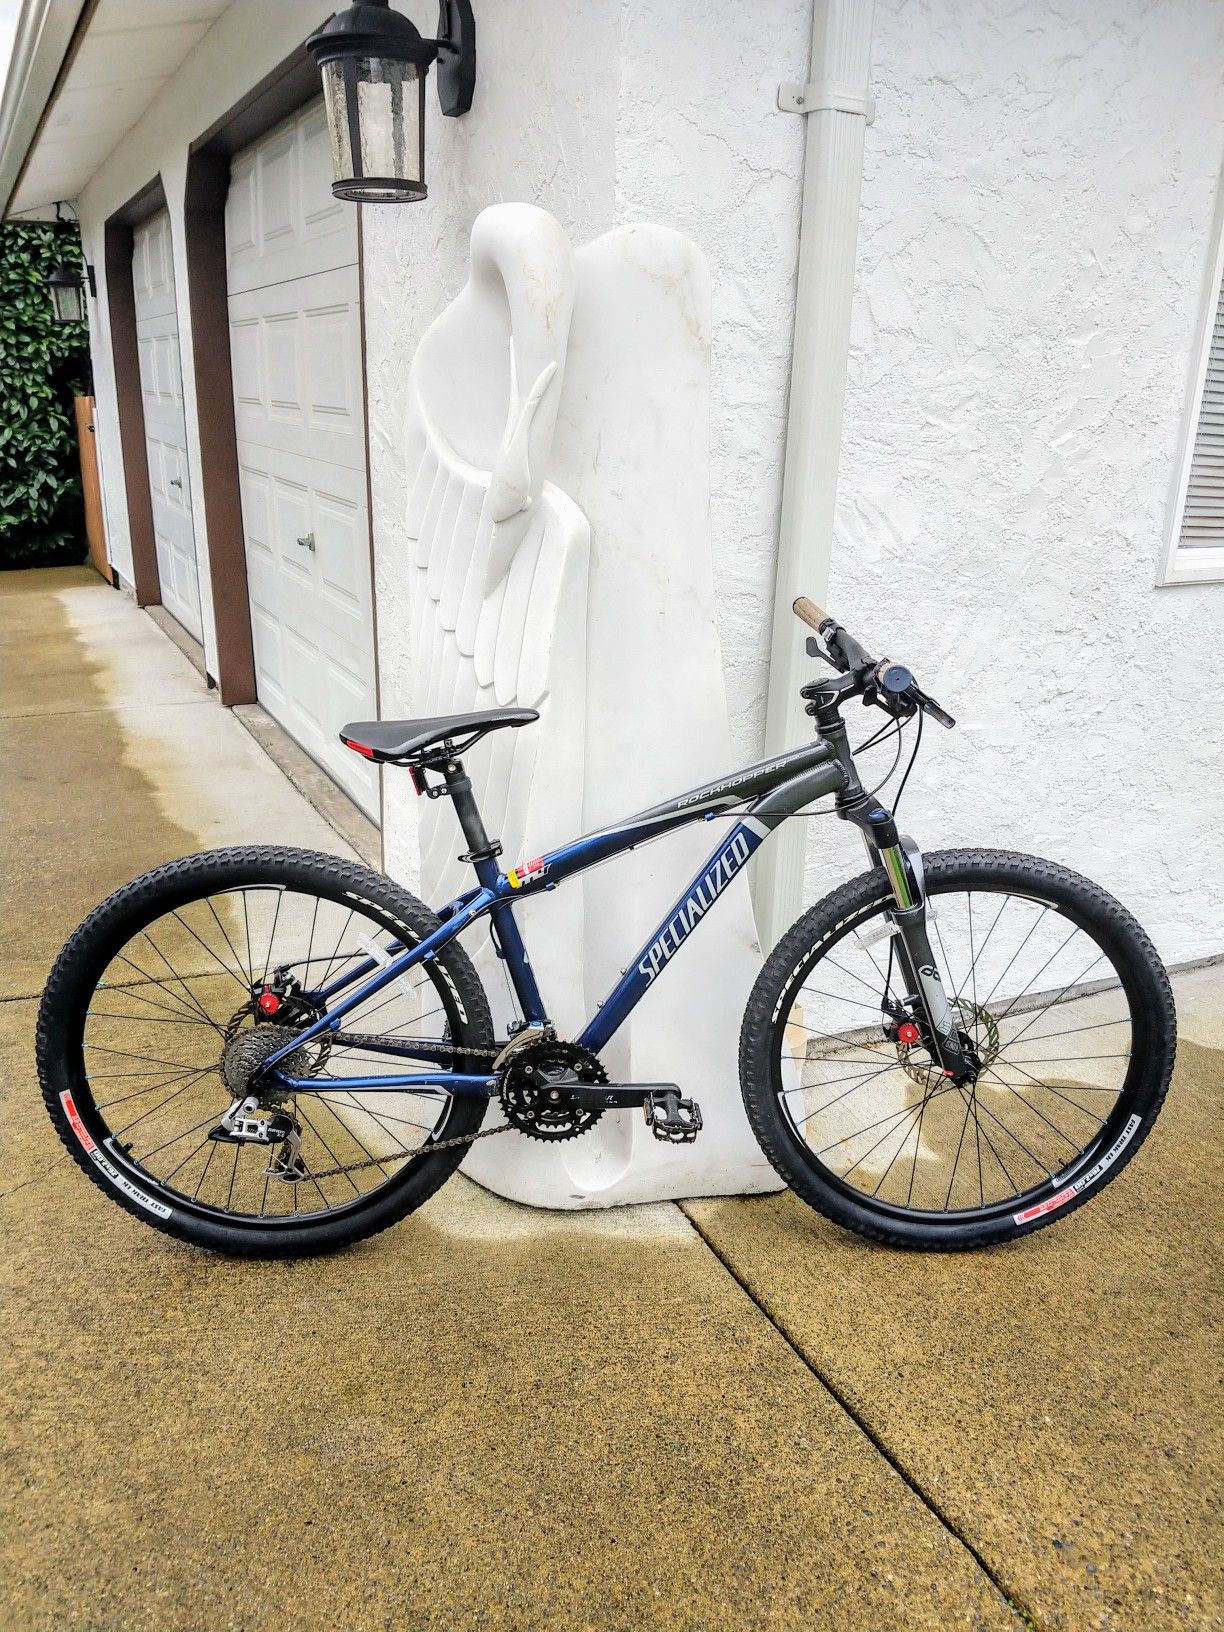 SPECIALIZED ★ RockHopper Comp Disc M4 ★ MOUNTAIN BIKE ★ Rock Shox ★ hardly used EXCELLENT CONDITION